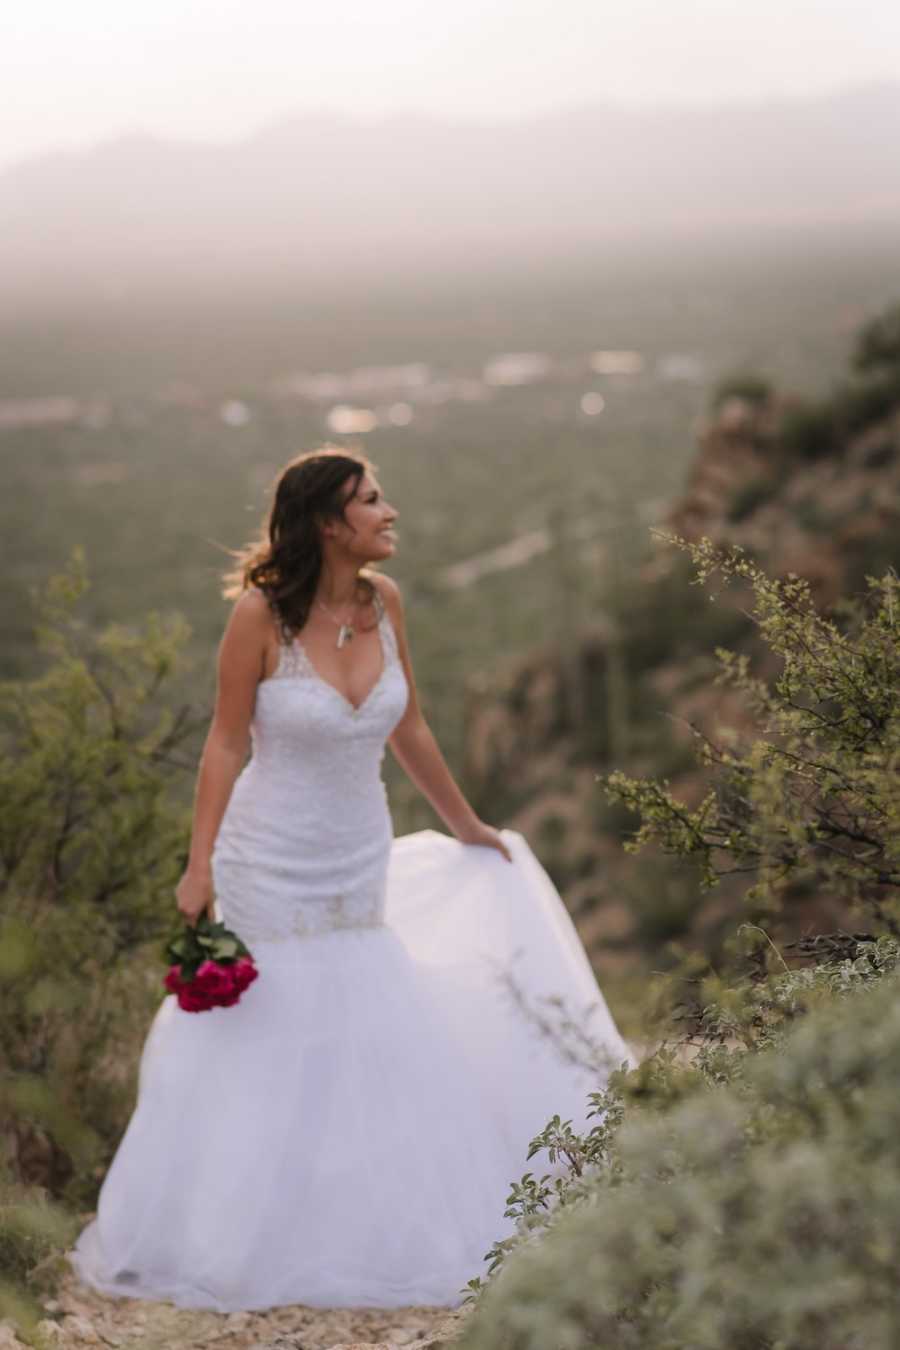 Woman in wedding gown stands on mountain holding bouquet of red roses